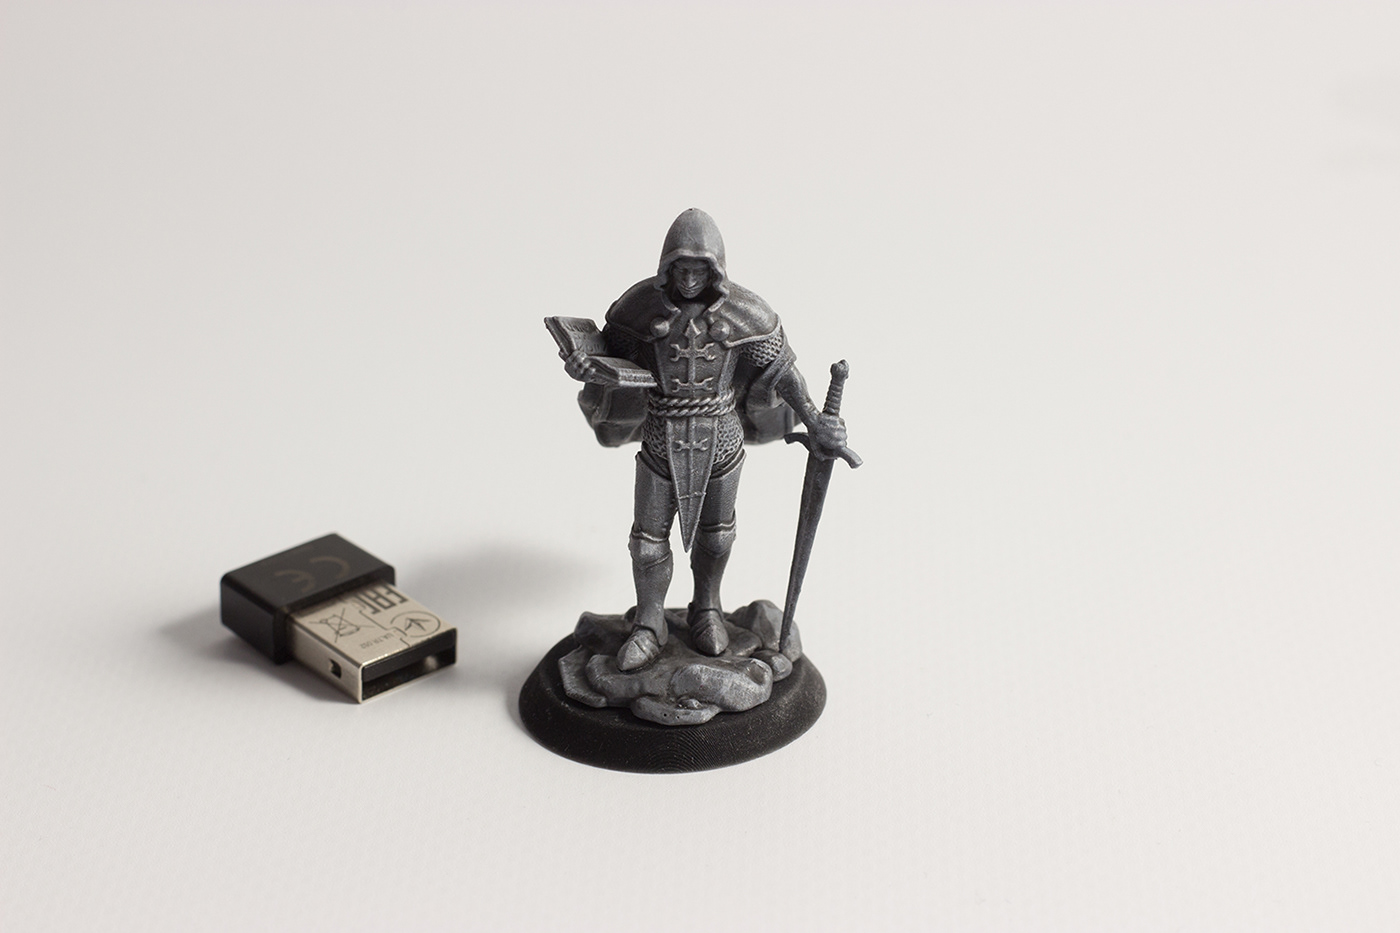 miniatures toys 3dprint runelords boardgames photon monster anycubic photo characters